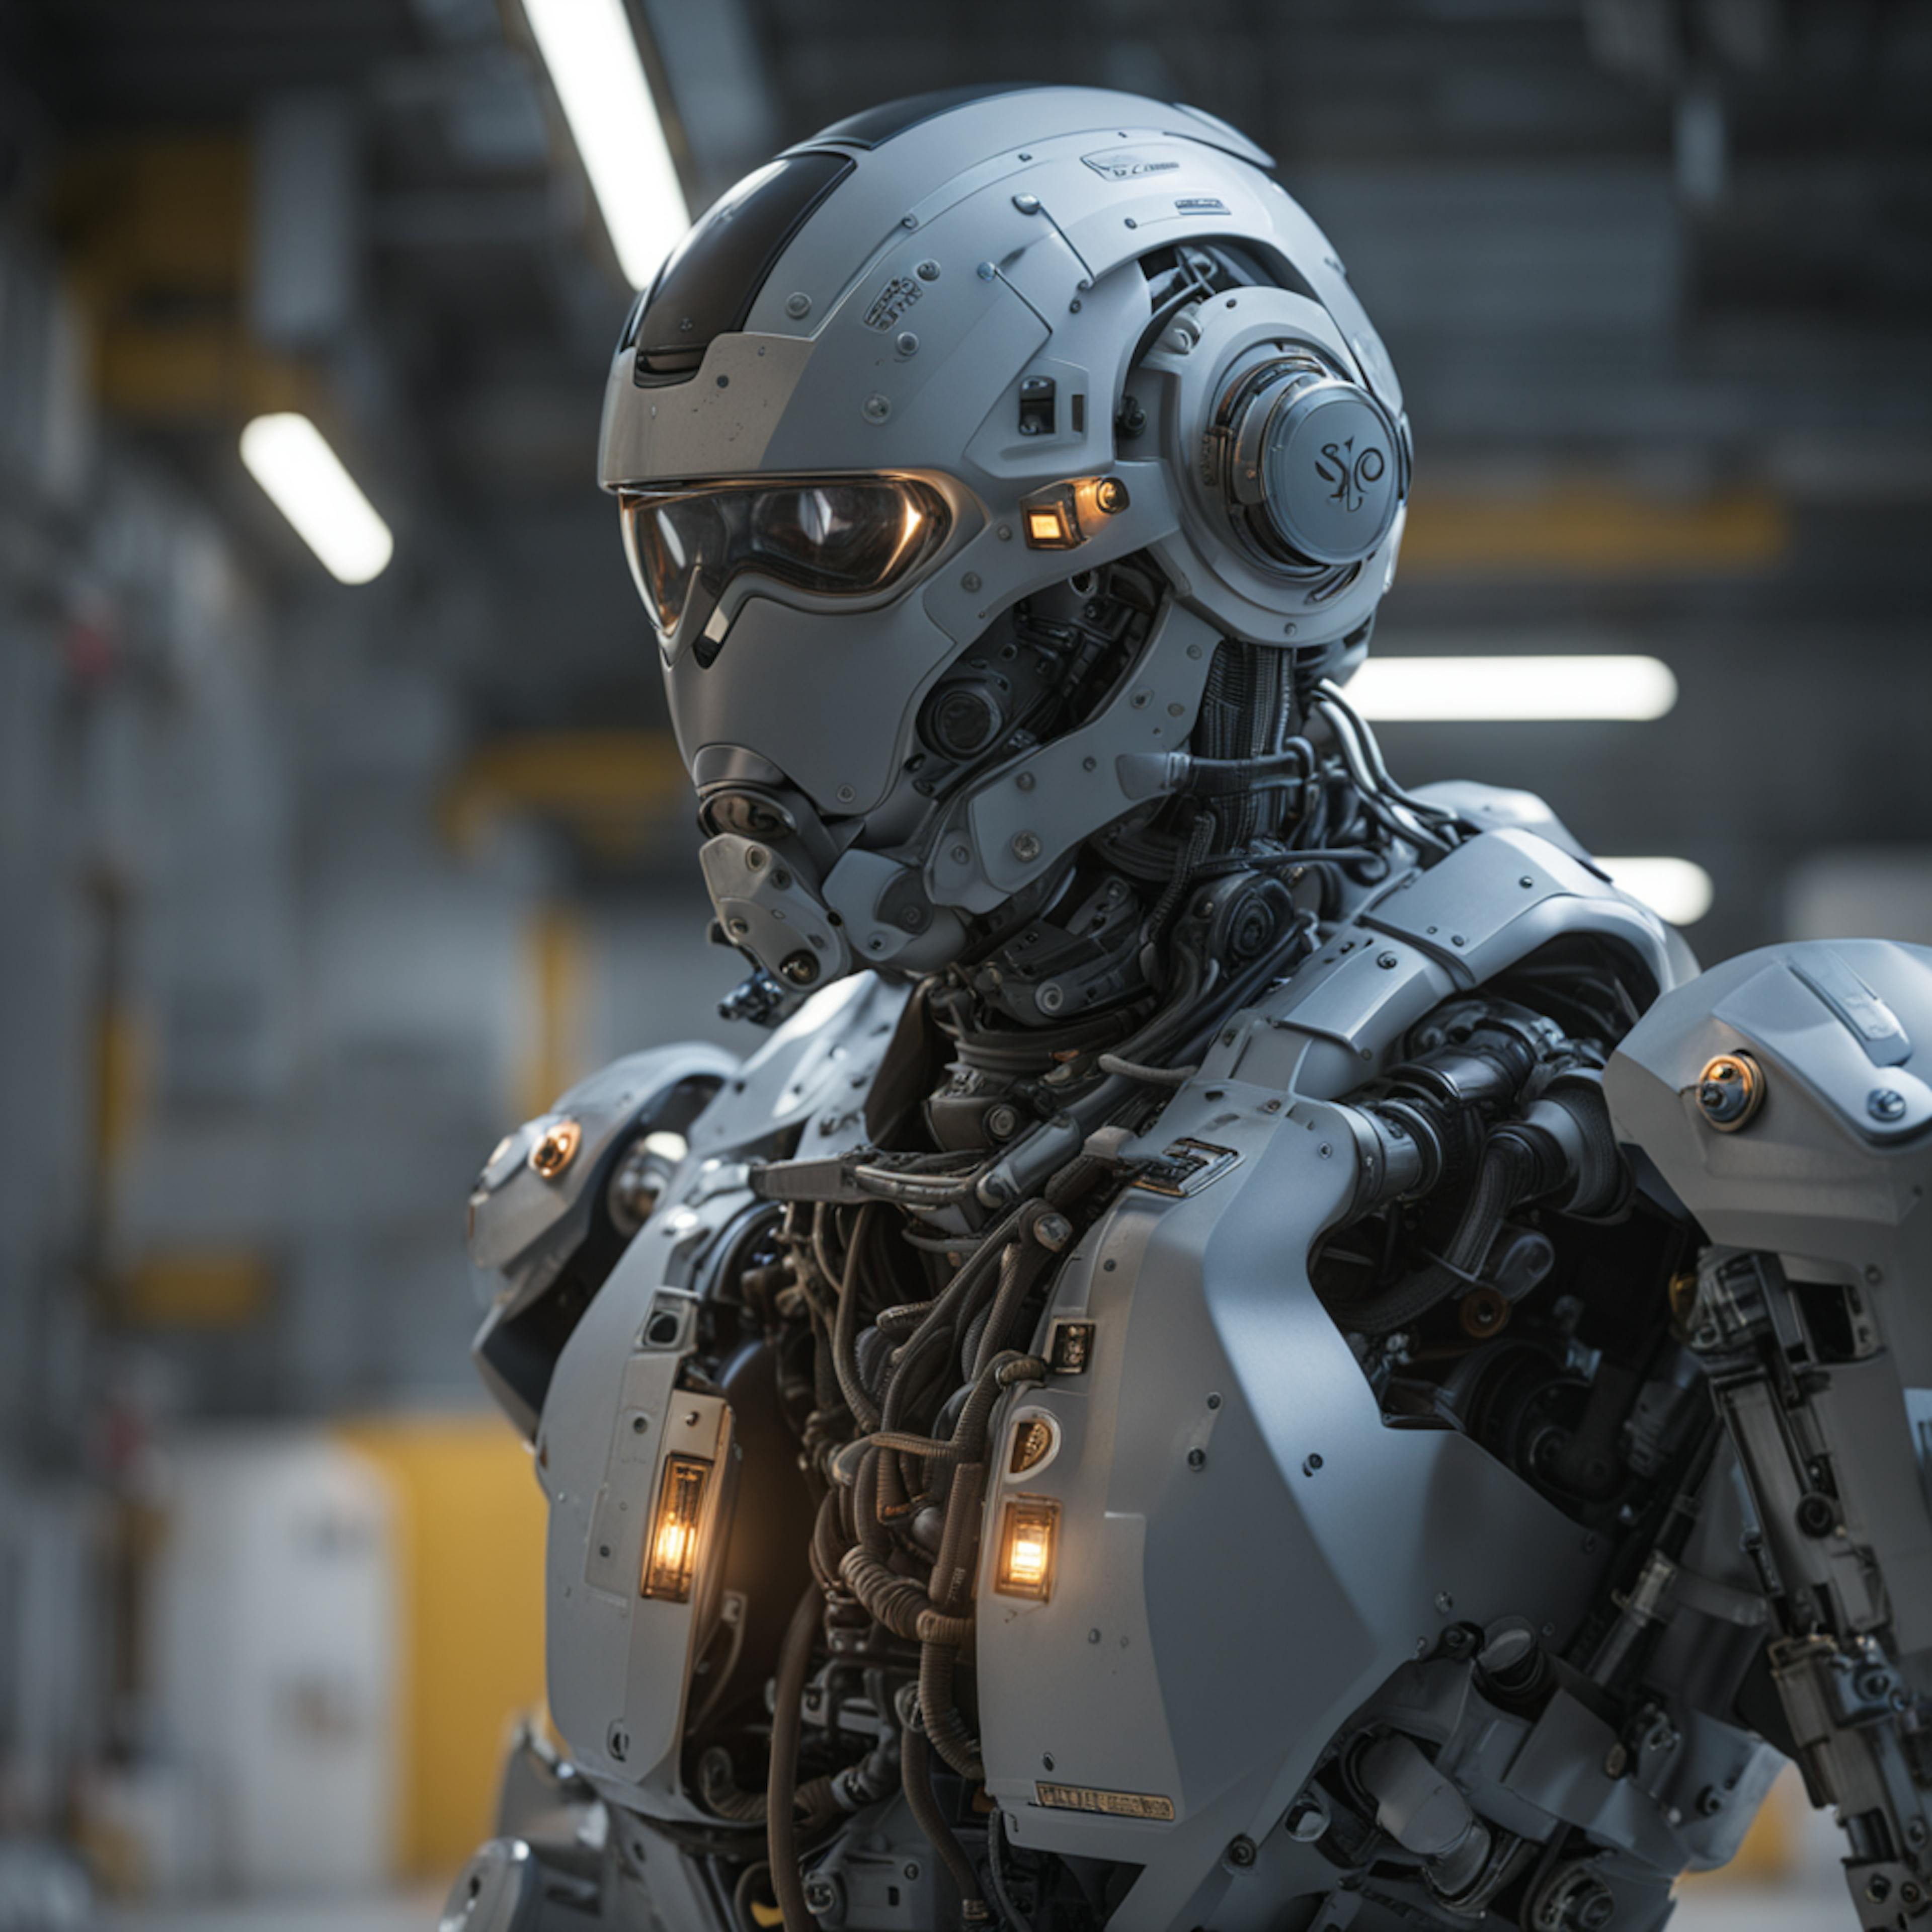 A highly advanced robotic figure standing in a futuristic environment, exemplifying the cutting-edge potential of how to use AI in marketing for precision targeting and customer engagement.